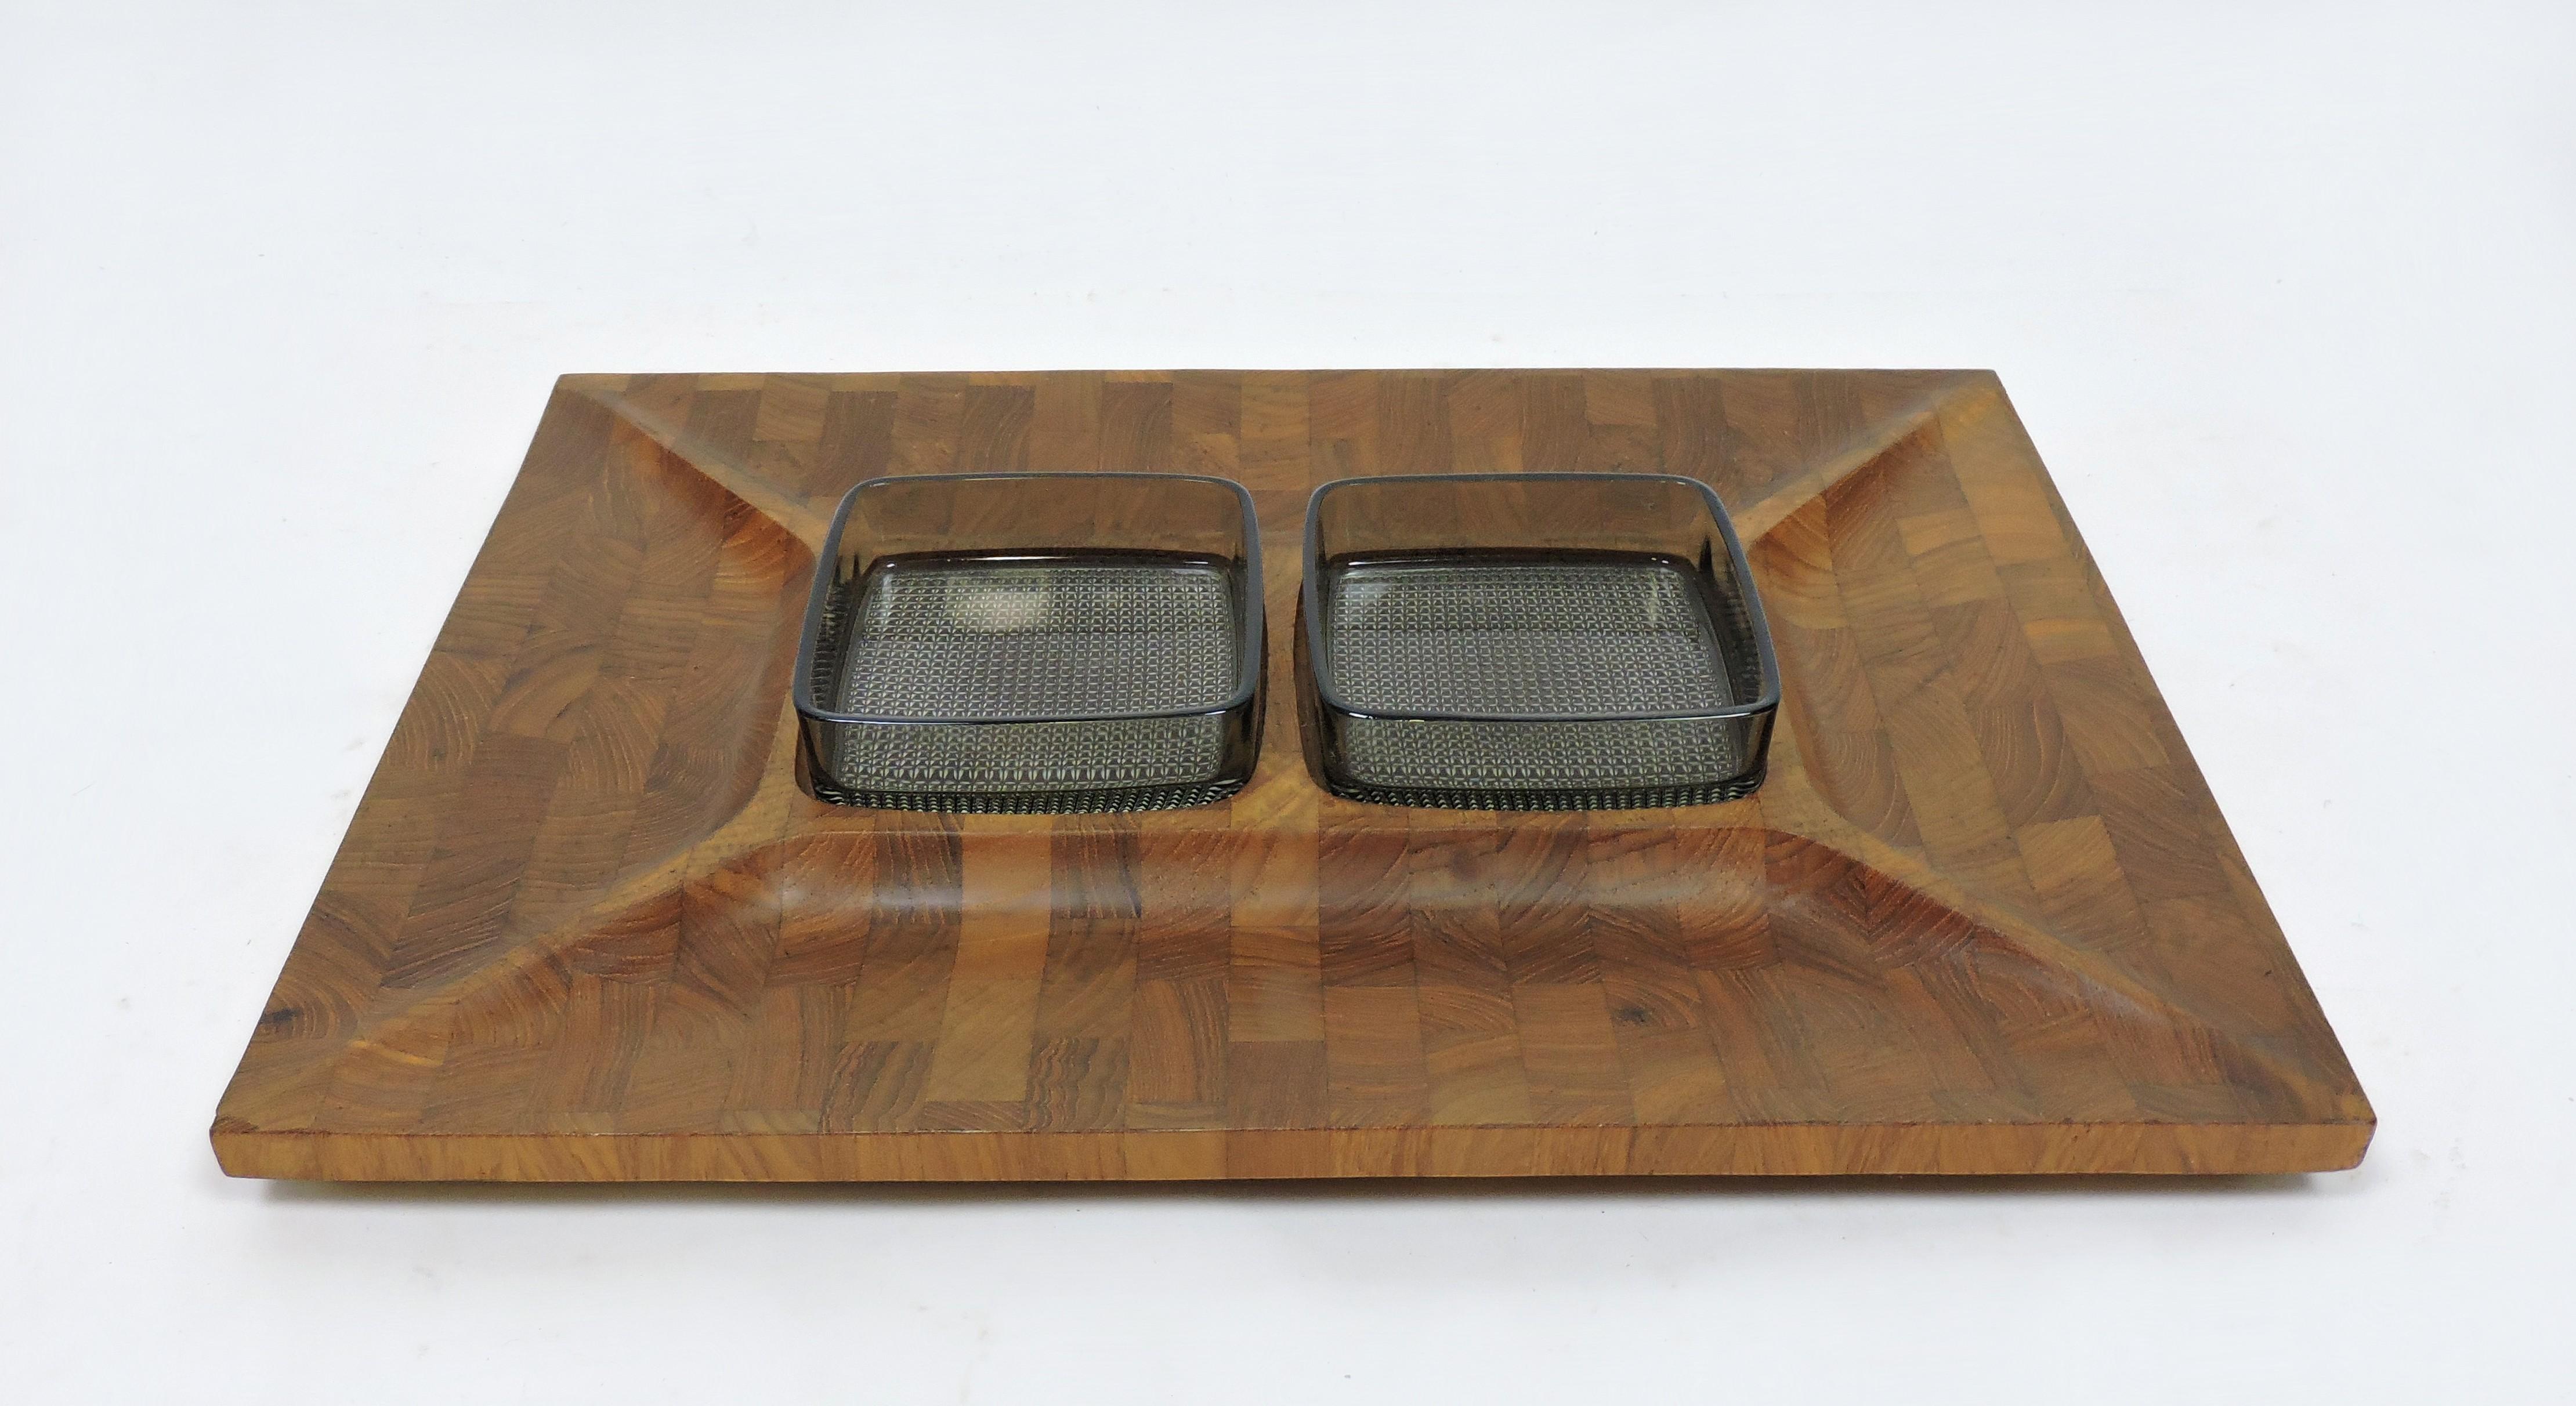 Lovely solid teak tray with two glass inserts made in Denmark by Digsmed. This tray is made of staved end grain teak and has four divisions. The glass inserts are a light gray color and are 4.25 inches square by 1.25 inches high. Stamped on the